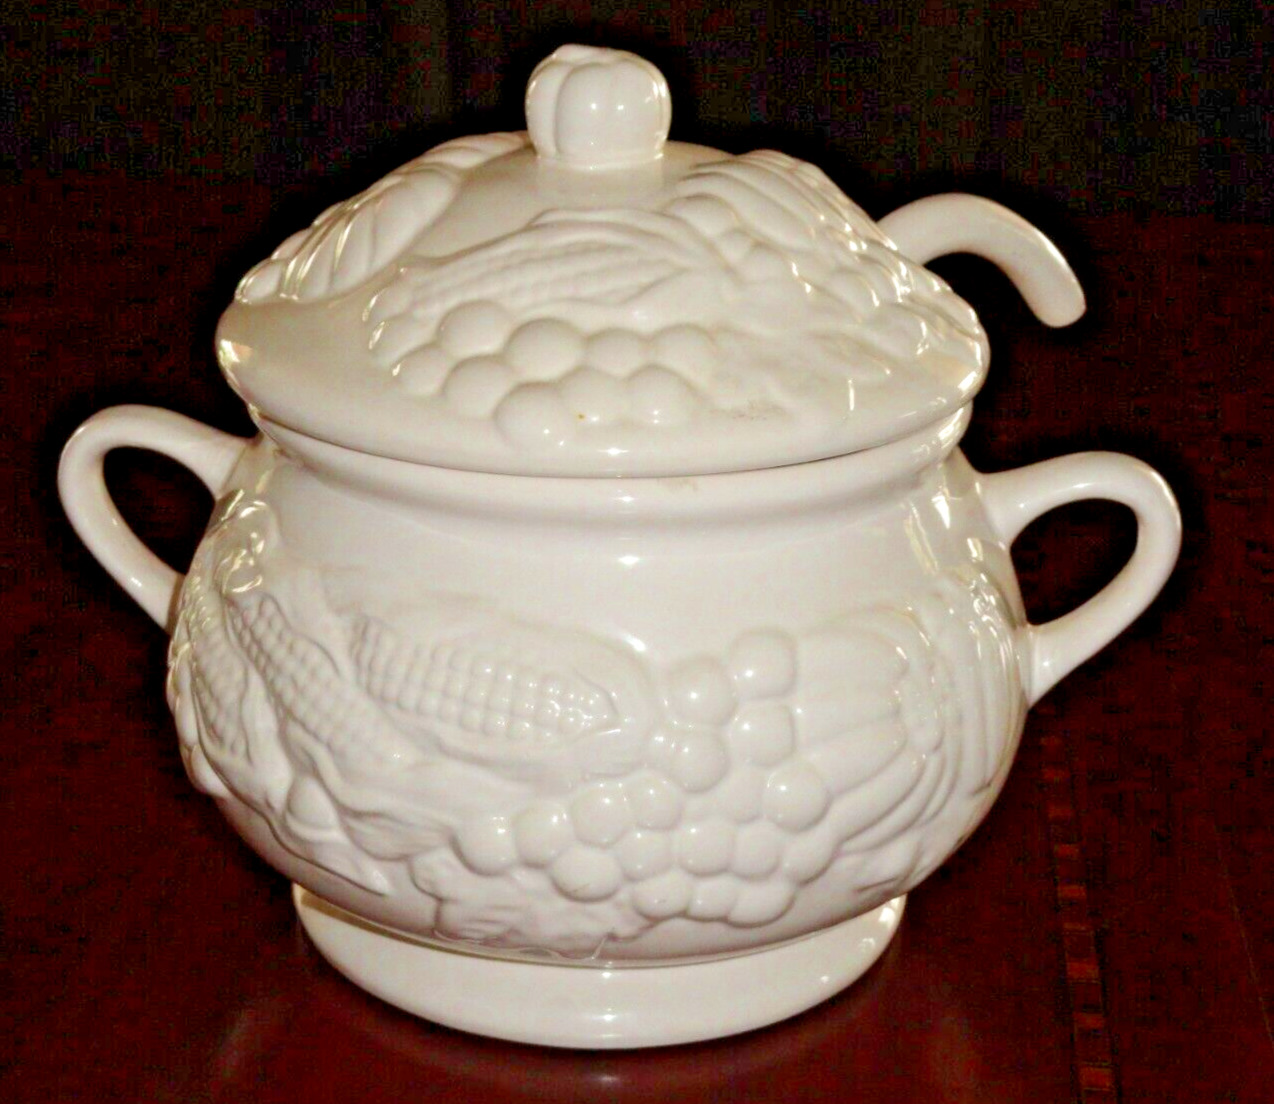 Vintage Bright White WCL Soup Tureen with Lid and Ladle Autumn Harvest 3 quart